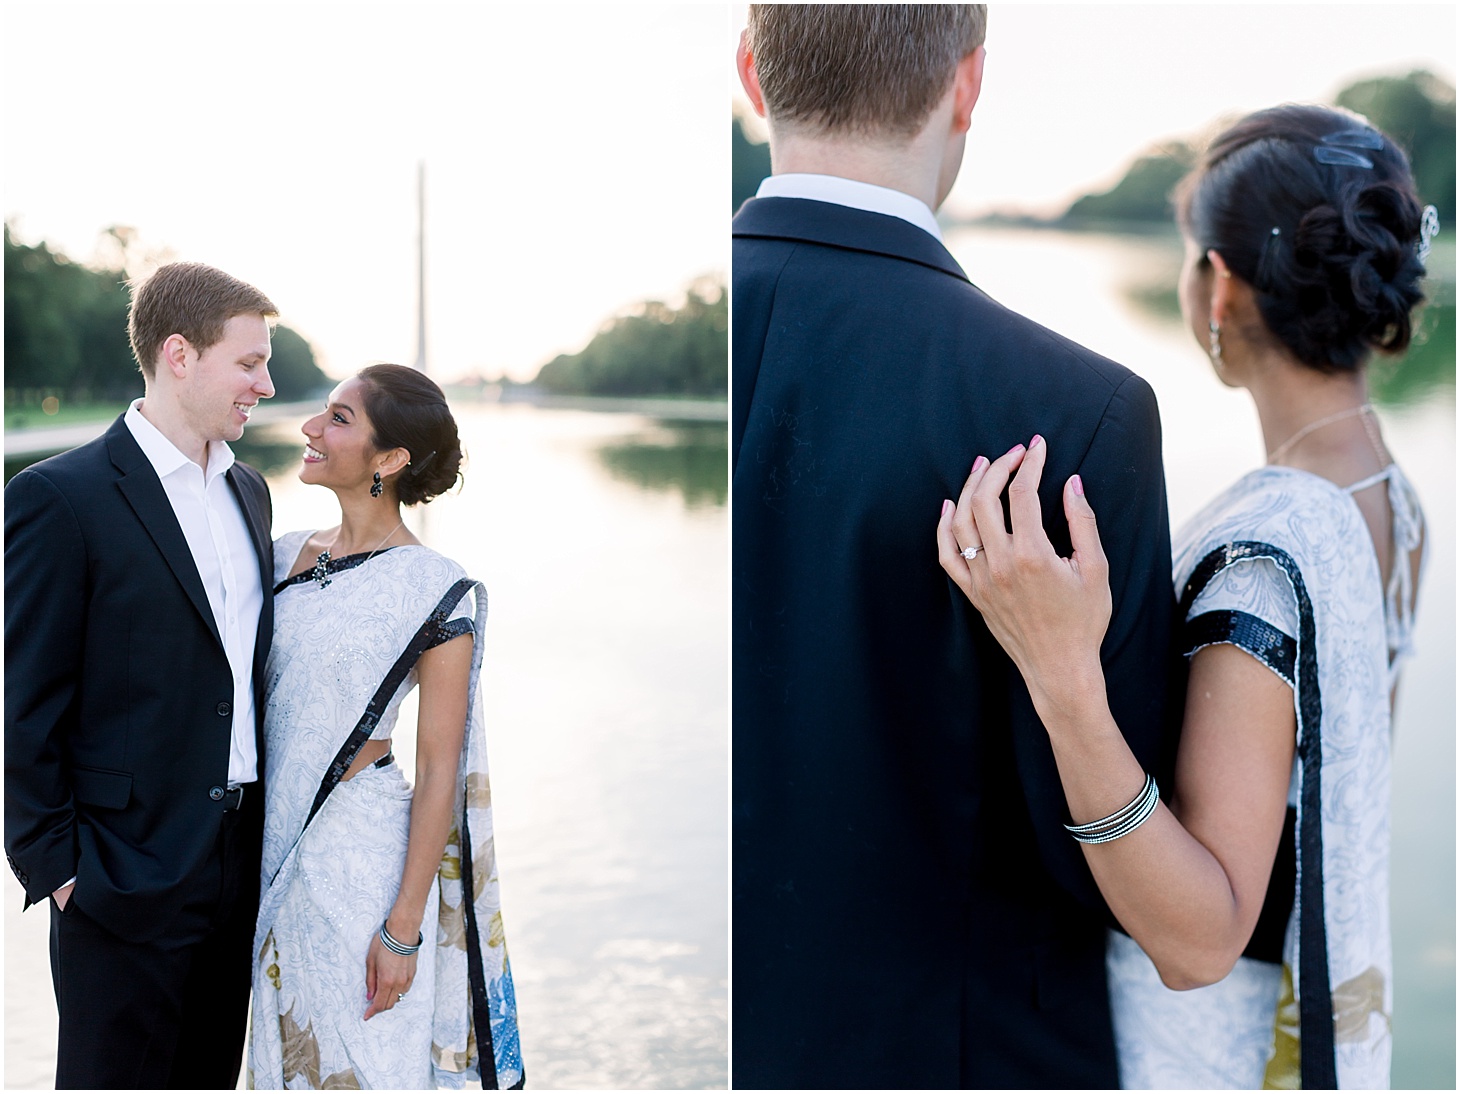 Engagement Portraits at the Reflecting Pool in Washington, DC | Sunrise Engagement Session at the Lincoln Memorial Reflecting Pool | Sarah Bradshaw Photography